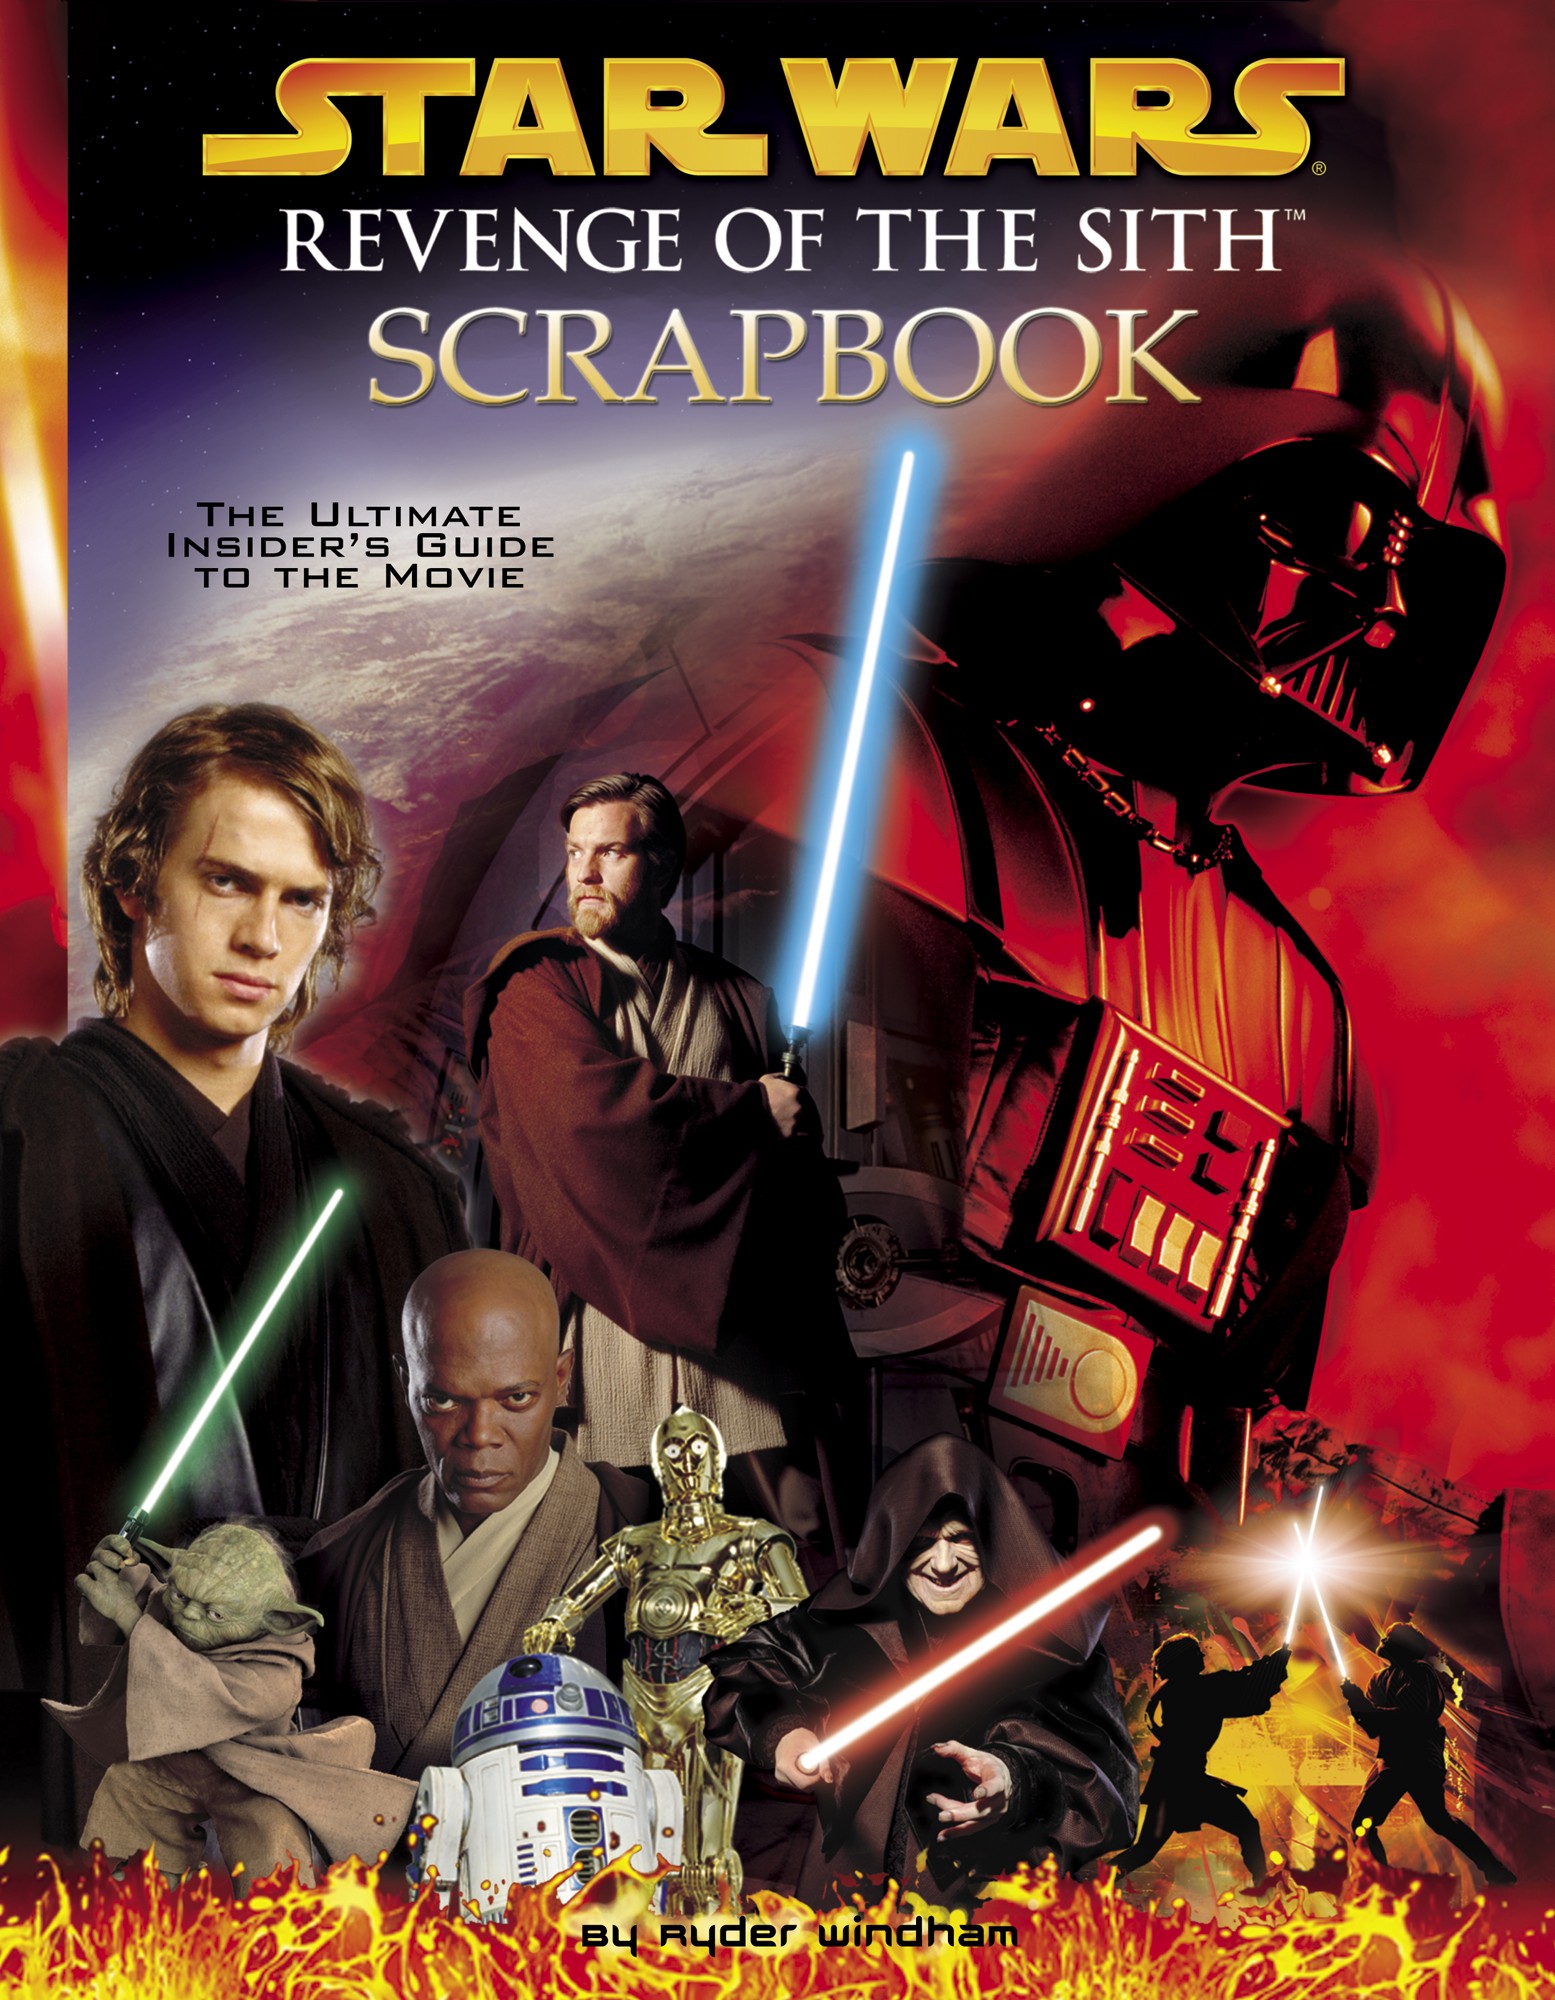 star wars revenge of the sith pc game